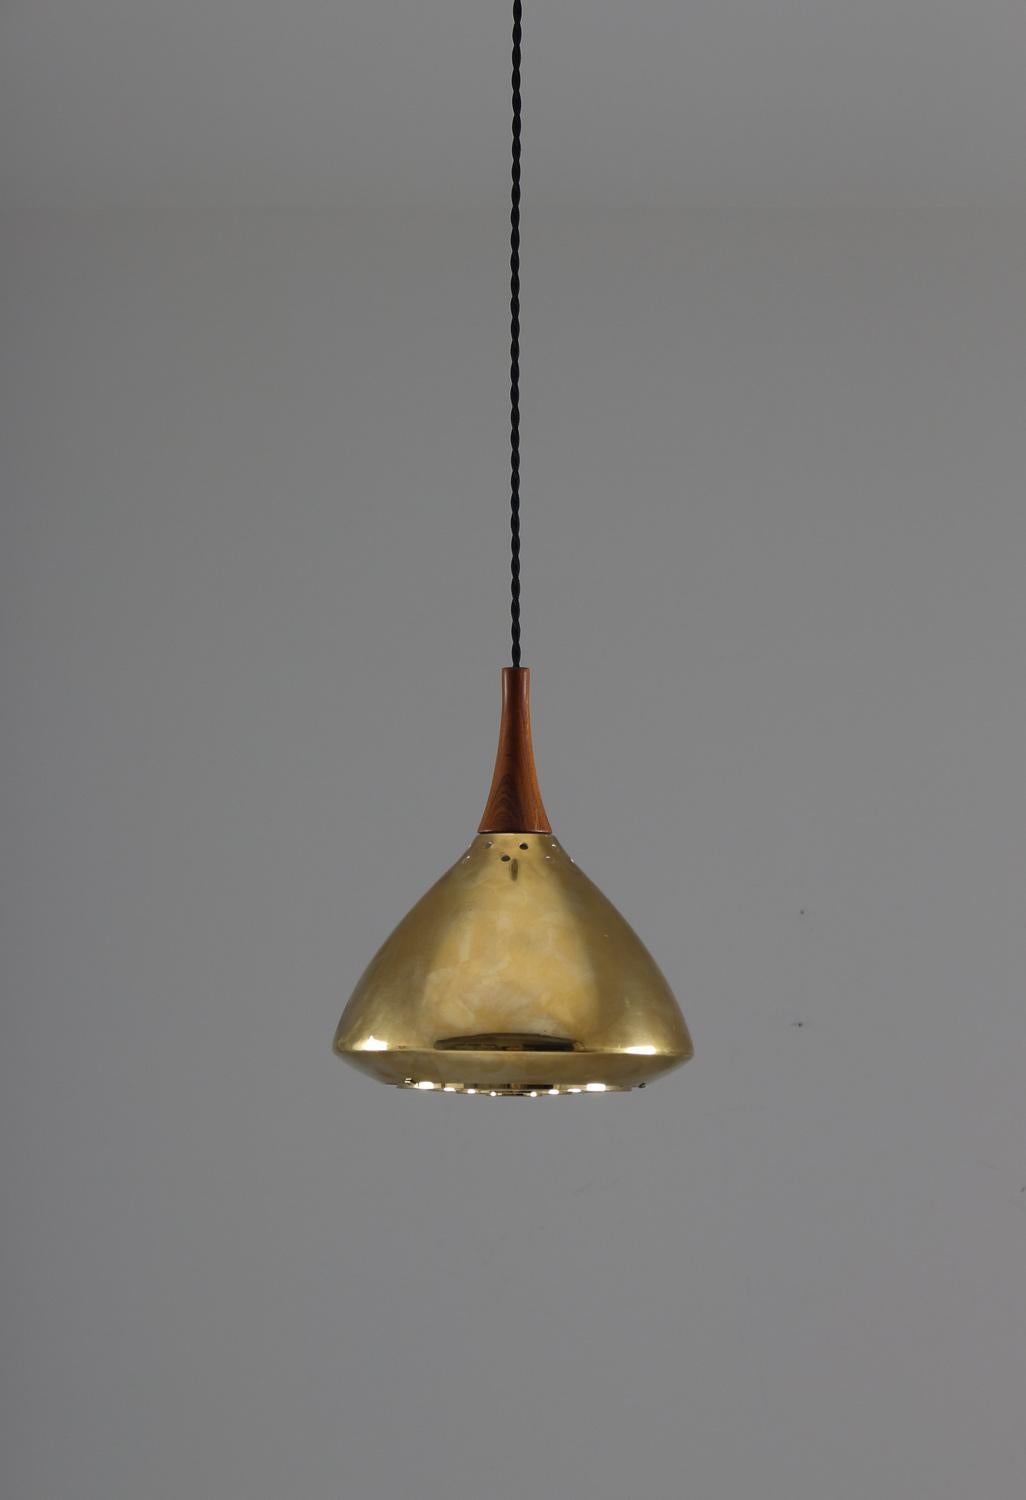 Rare ceiling lamp in brass and rosewood manufactured by Falkenberg, Sweden.
The lamp is made of thick brass and comes with its original brass canopy. The beautiful shape reminds a lot of model 